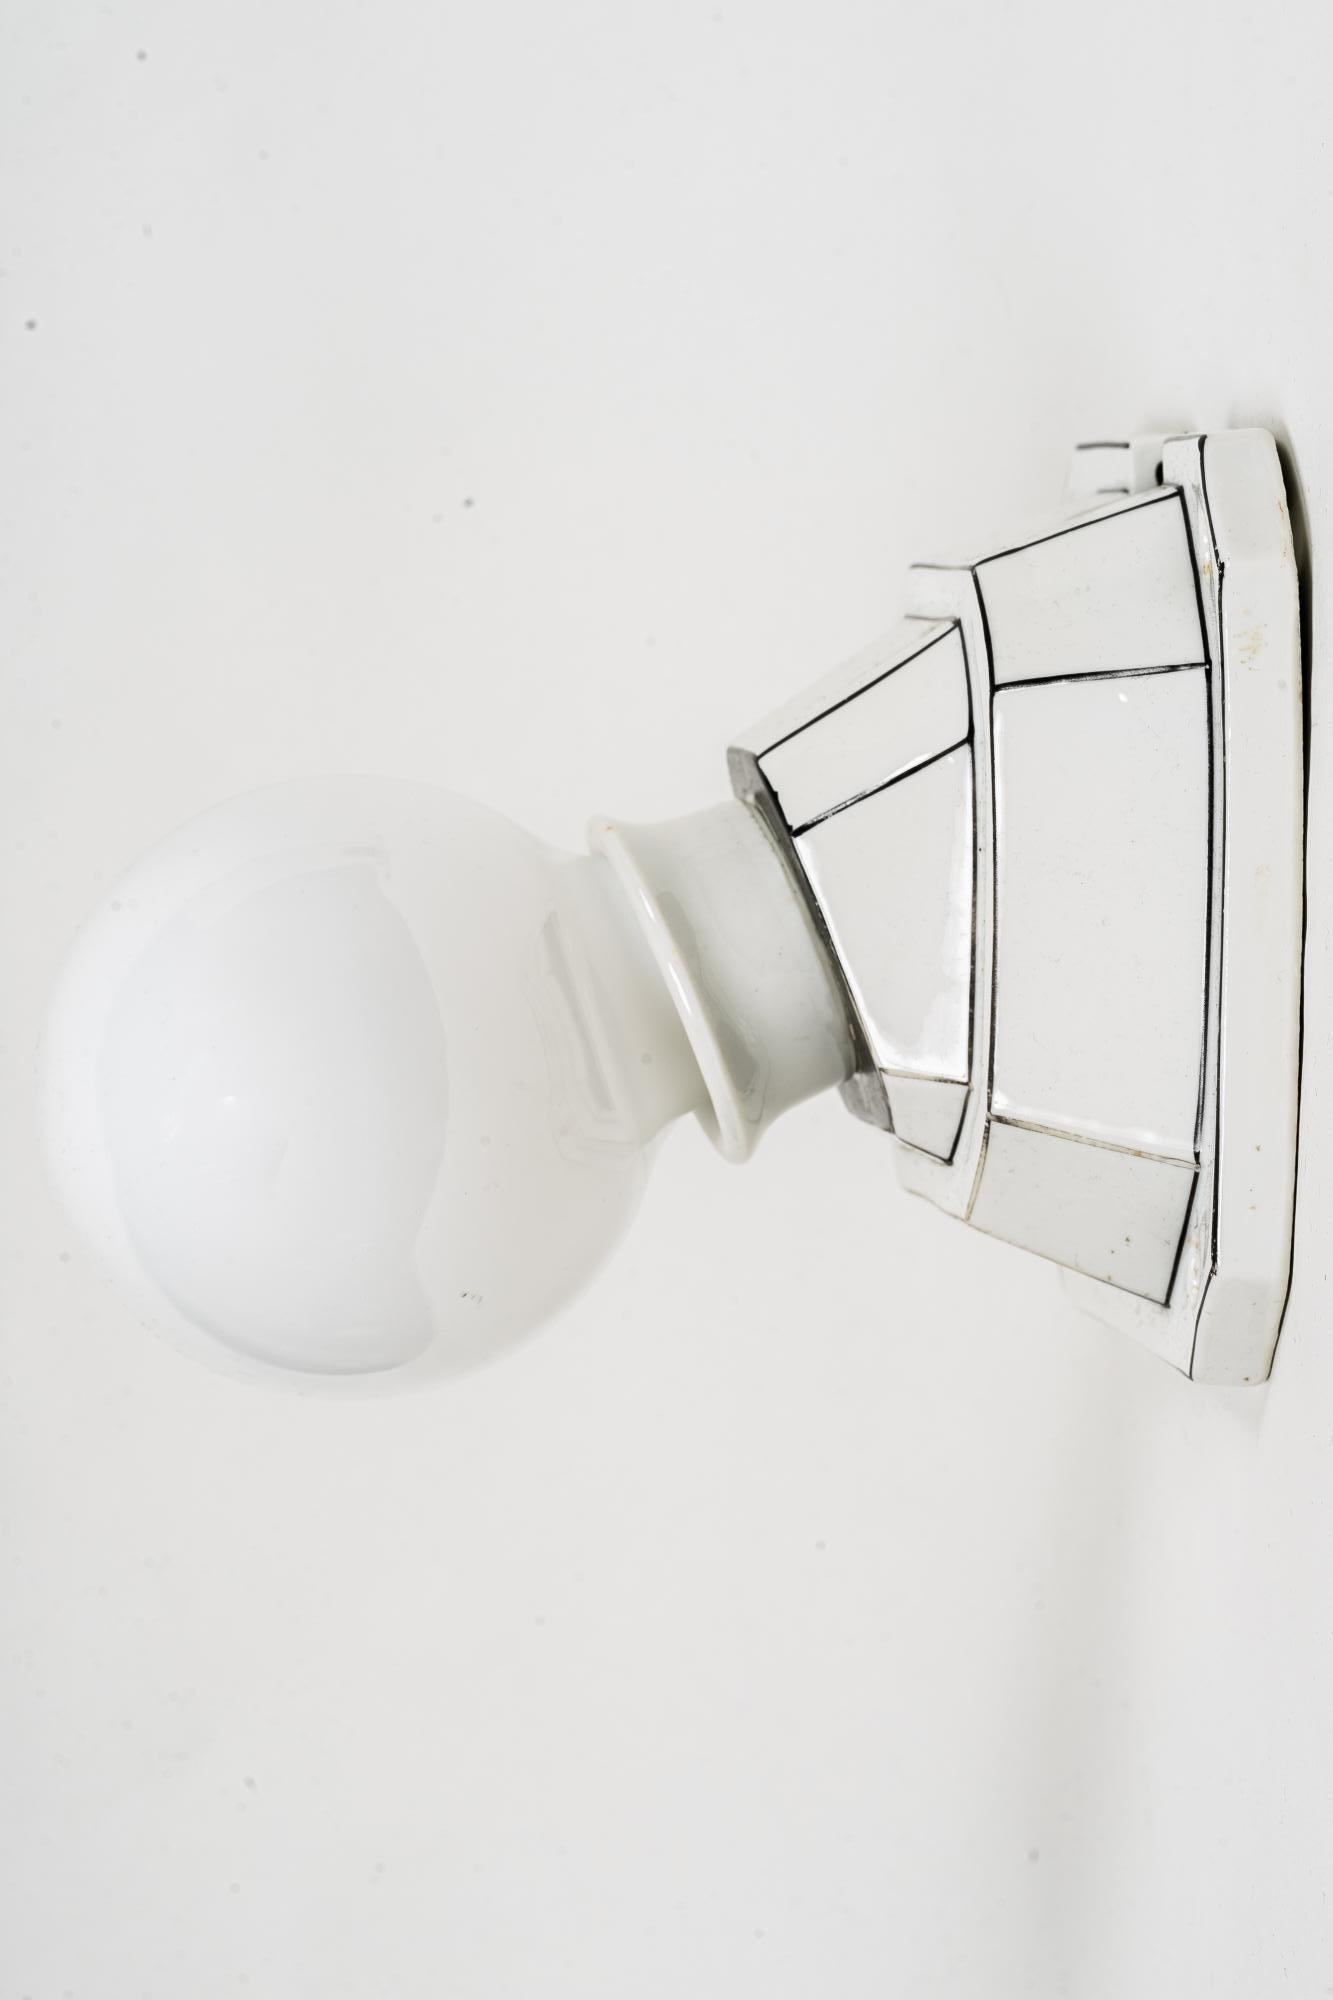 Art Deco Bauhaus ceiling or wall lamp around Germany 1920s.
Painted porcelain.
Original condition.